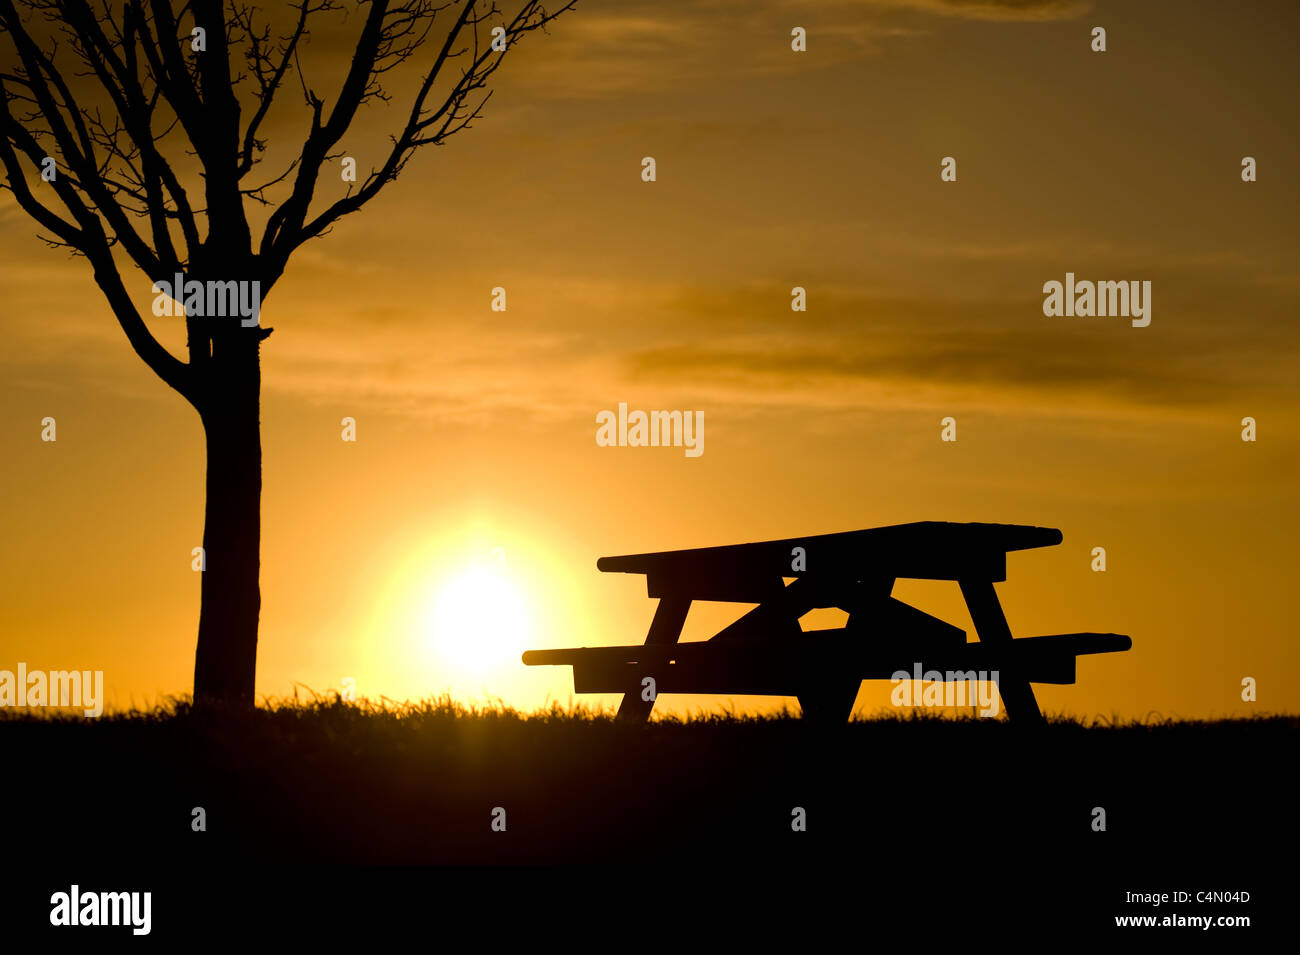 Picnic bench and tree silhouetted at sunset Stock Photo